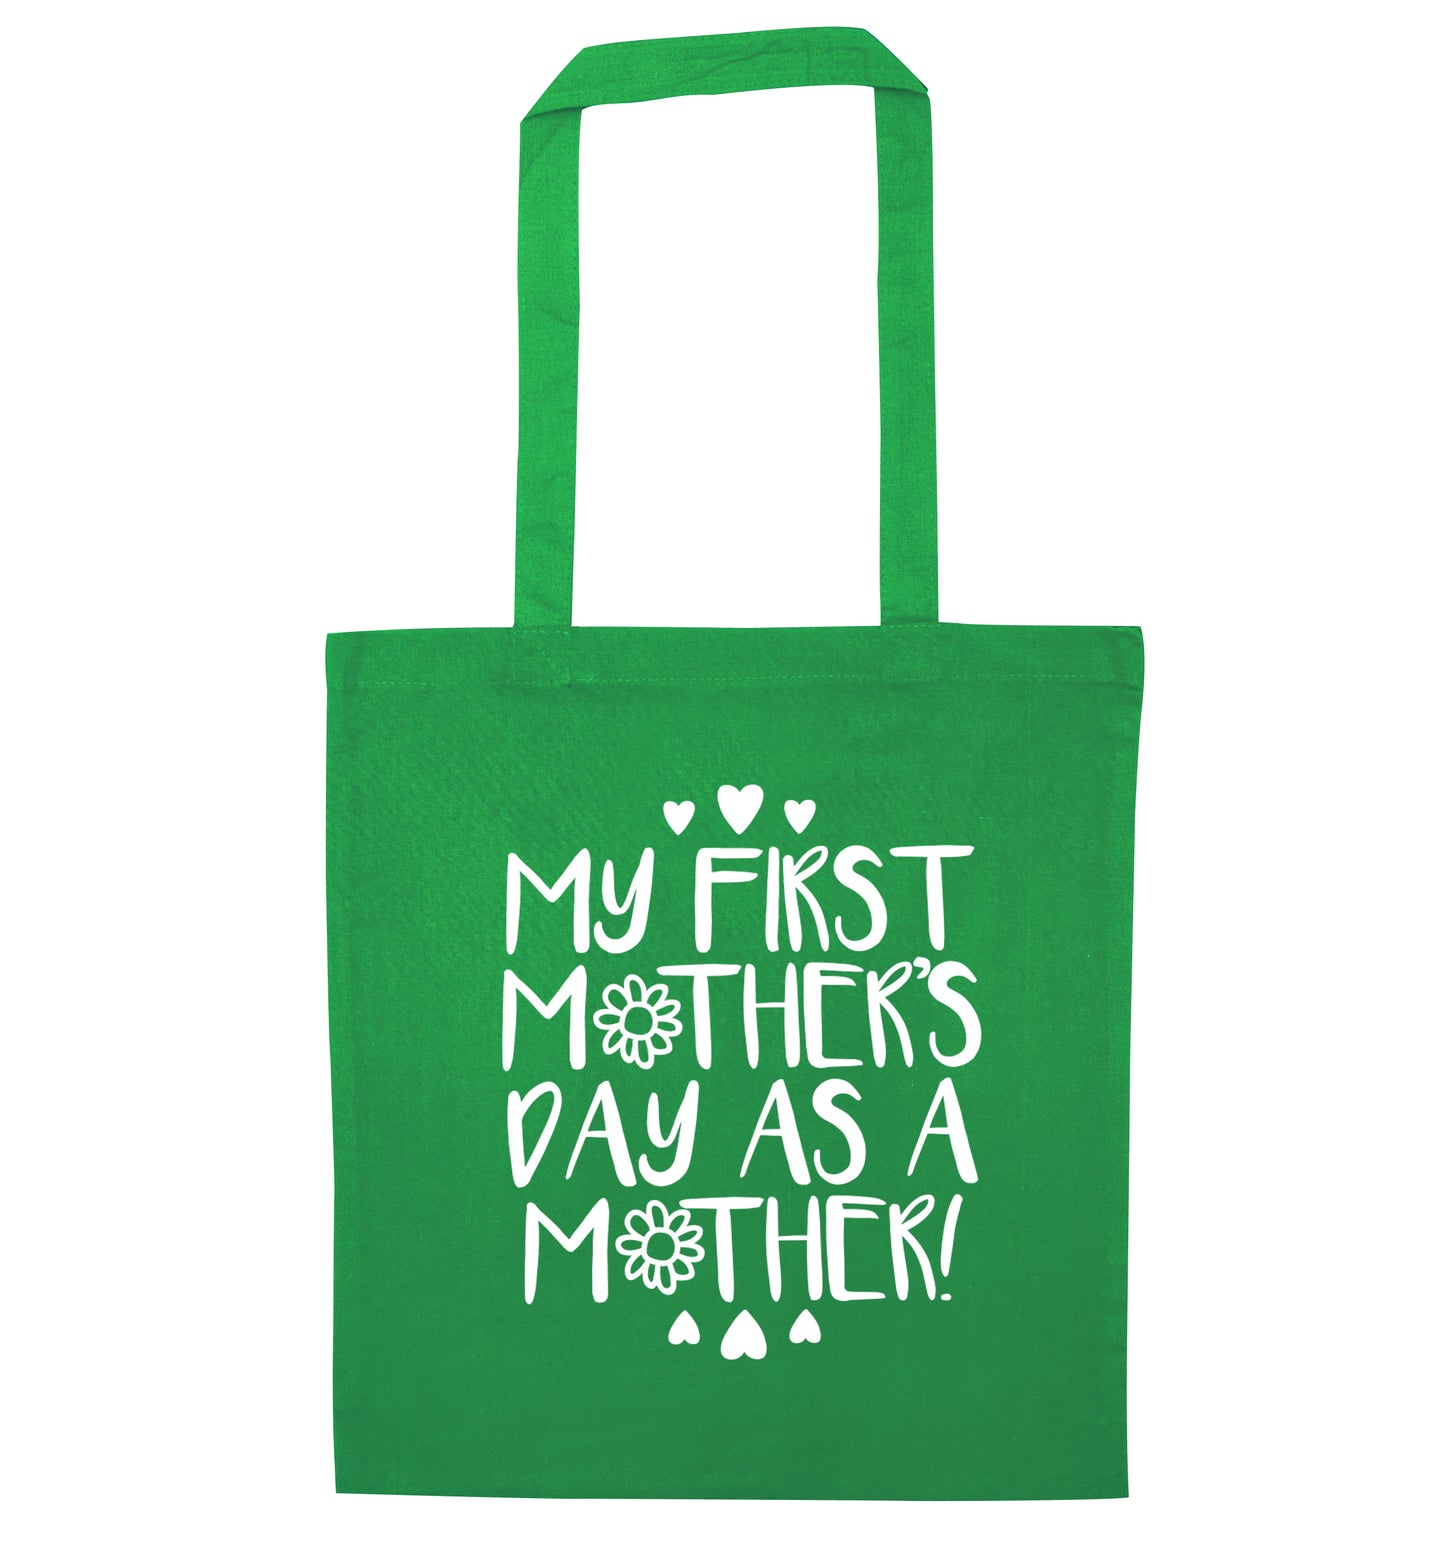 My first mother's day as a mother green tote bag